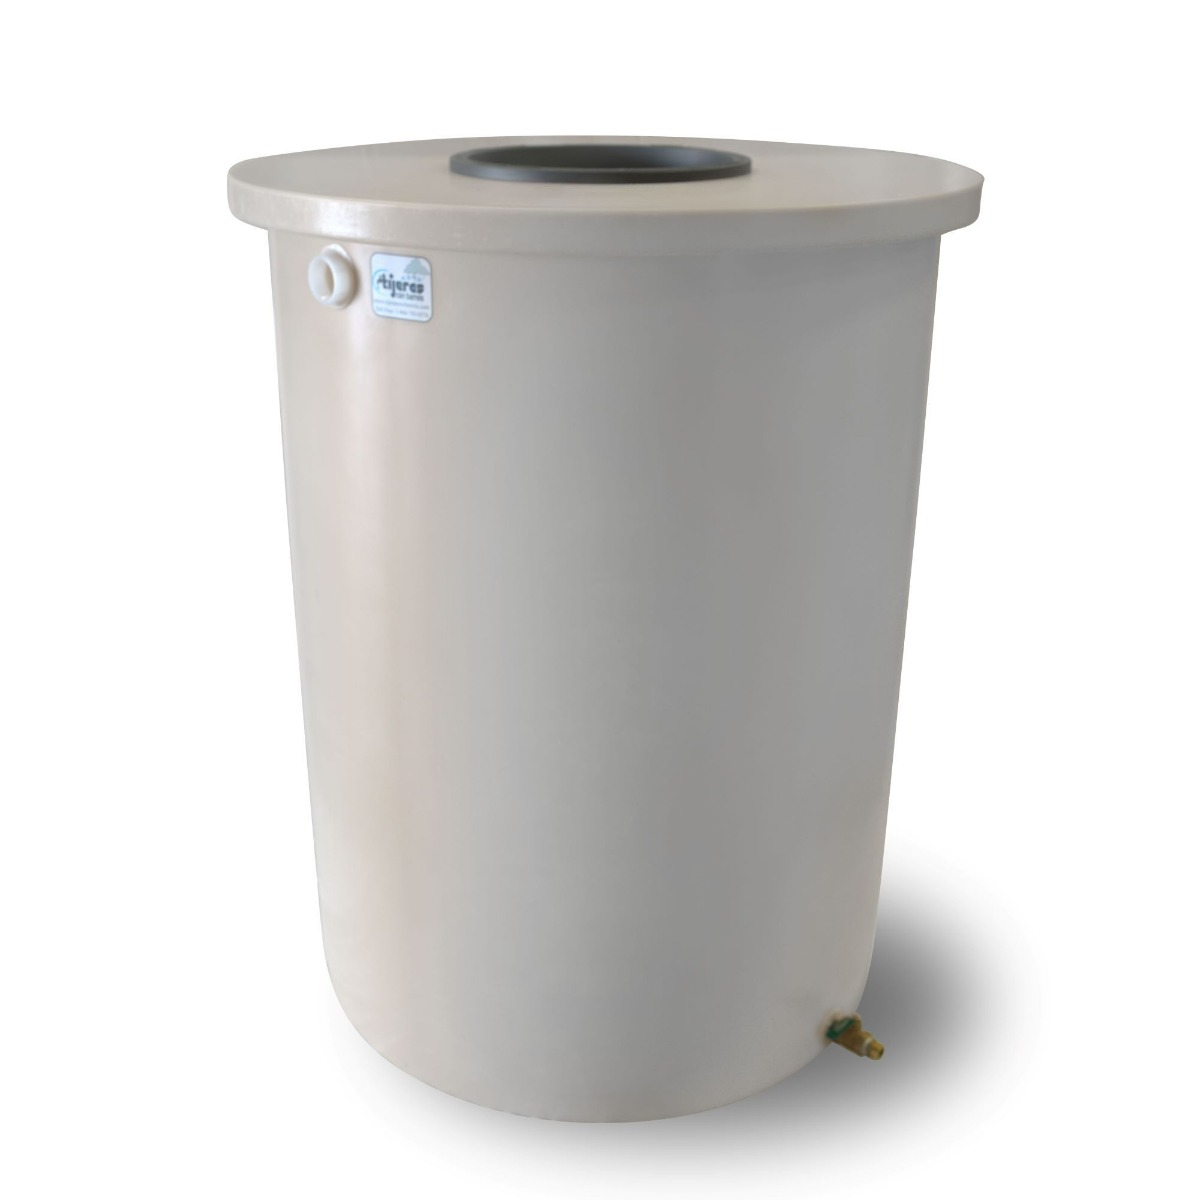 Buy Desert Plastics 48 Inch Wide 360 Gallon Plastic Vertical Rain Barrel Tank in White by Desert Plastics Rain Barrels of White color for only $758.99 in Tank Uses, QA Page, Rainwater, Products Available in Stores, Tanks By Gallon Range, Vertical Liquid Storage Tanks, Agriculture, Agriculture, Desert Plastics, Rain Barrels, Rain Barrels, Hurricane Readiness, Rain Barrels, Drought Readiness, Hurricane Readiness, Drought Readiness at Tank Depot,